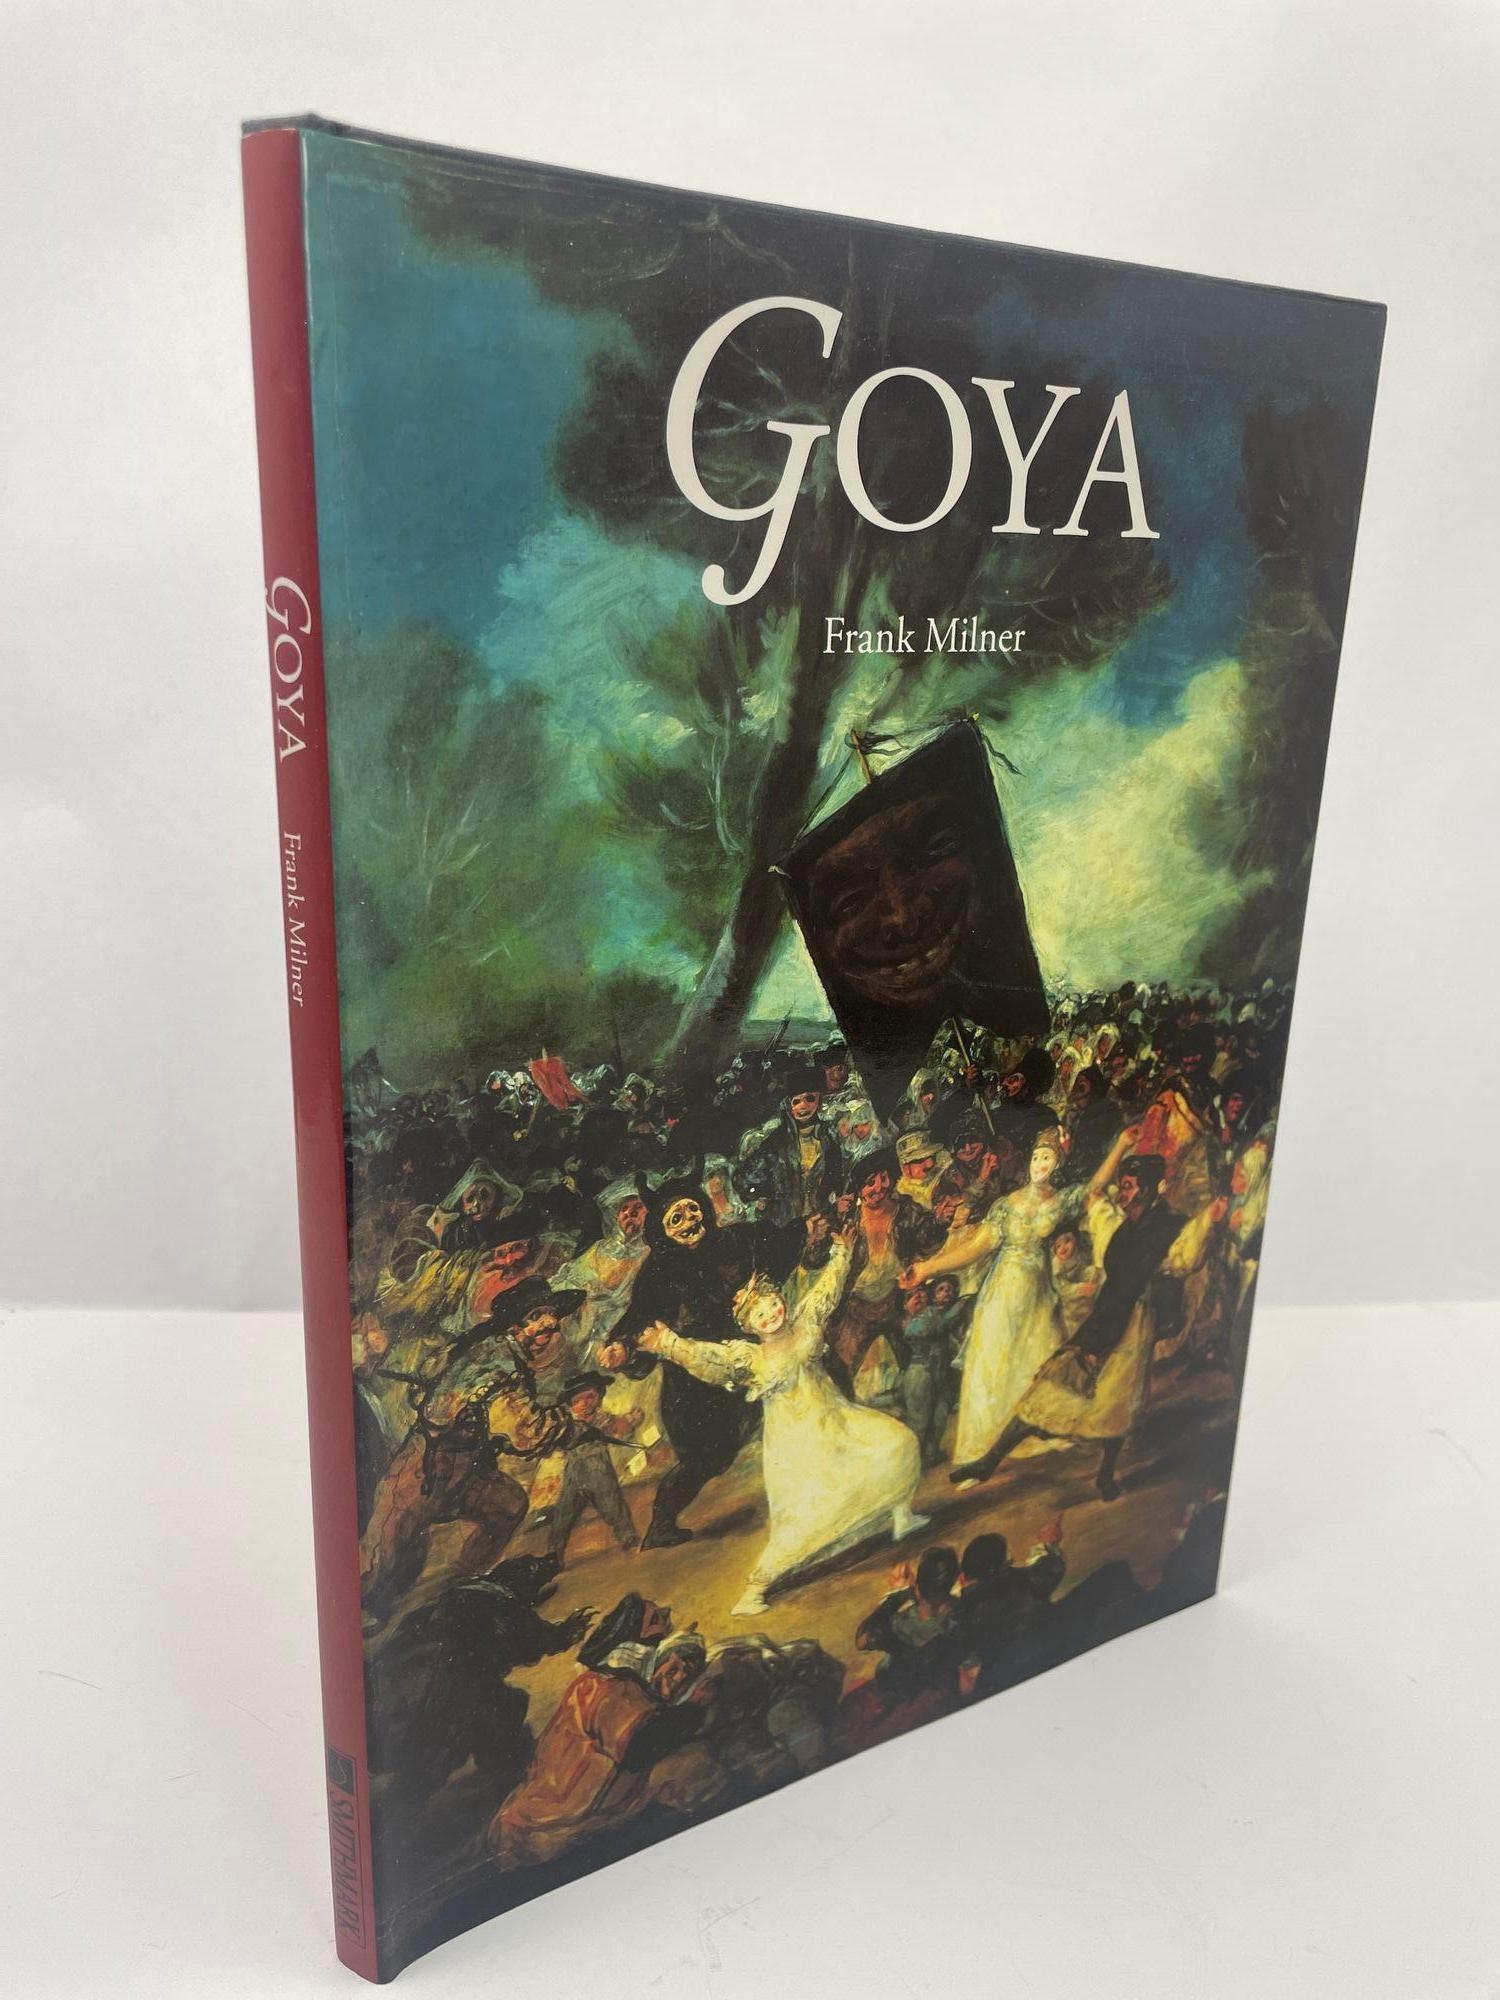 Goya Hardcover Book by Frank Milner.
Placing the works of Goya in the context of his own time, a biographical tour explains his limited success as a tapestry artist and court painter, and demonstrates how his later works reflected his surroundings